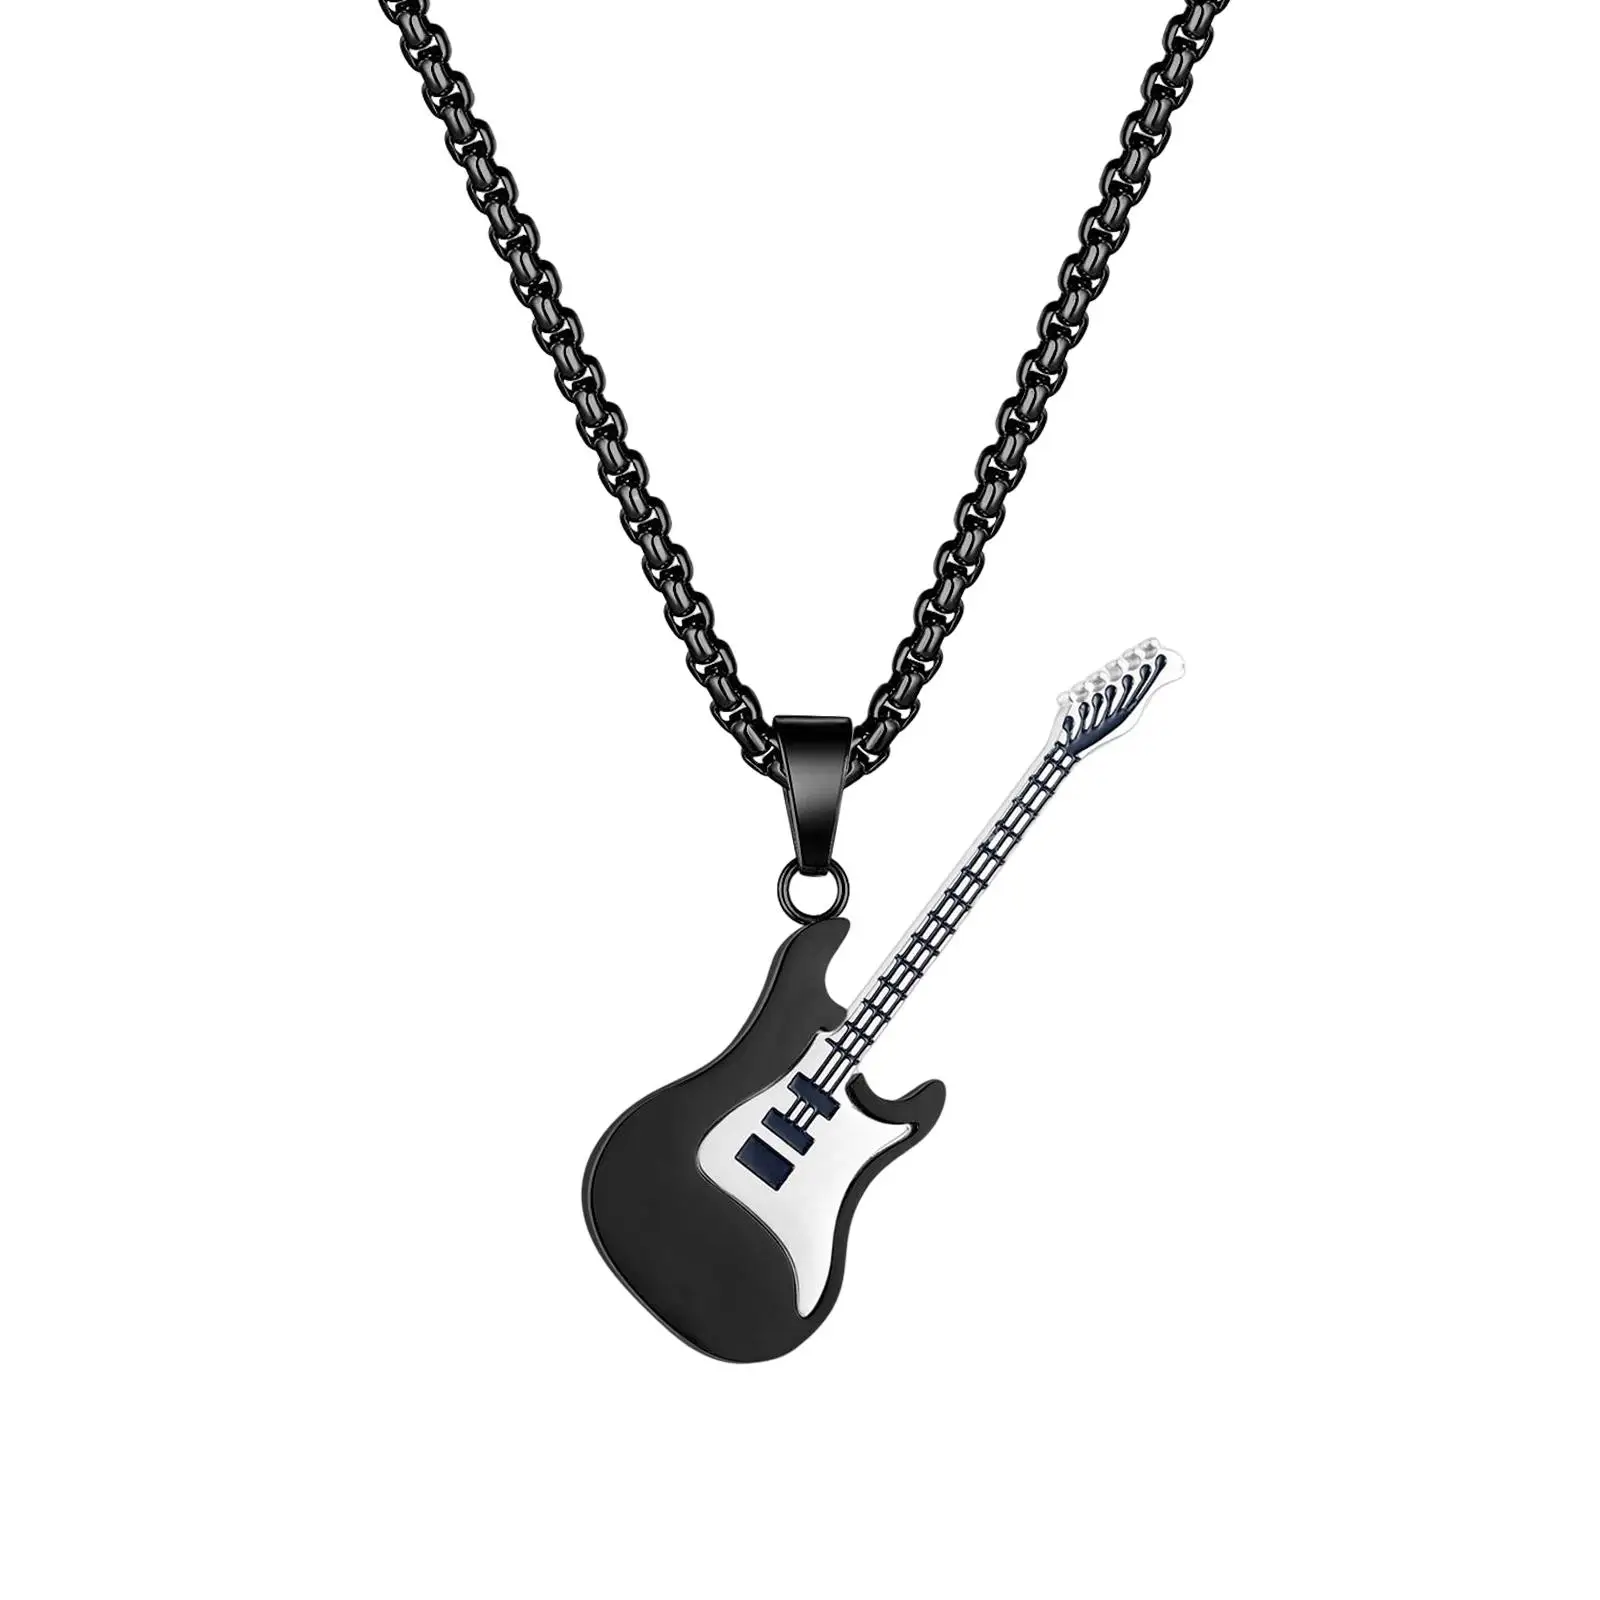 Musical Guitar Pendant Necklace Pendant Length 50mm Street Fashion Meaningful Gift for Guitarist, Bassist